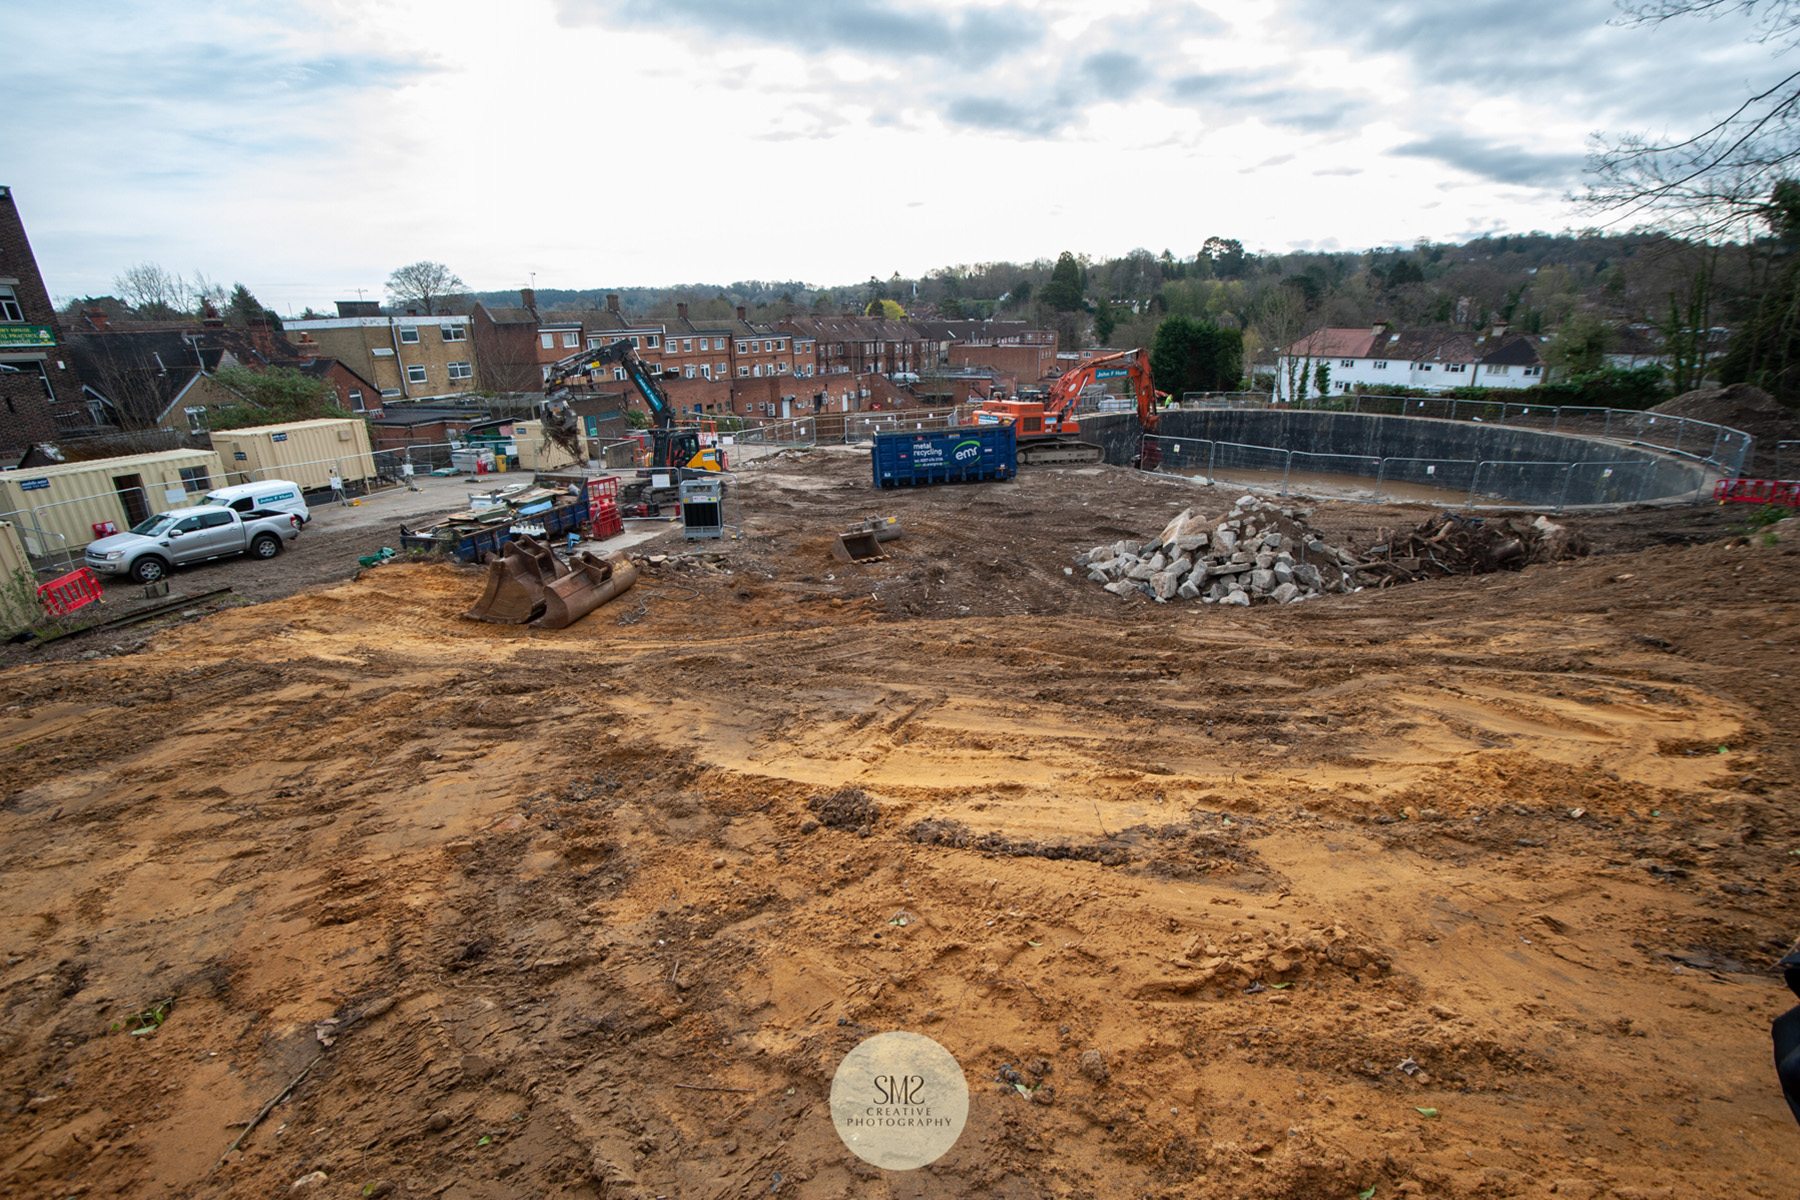 The site is vast, I felt privileged to be given access to capture images like this one. The pieces of steel that fell in the pit are almost cleared.